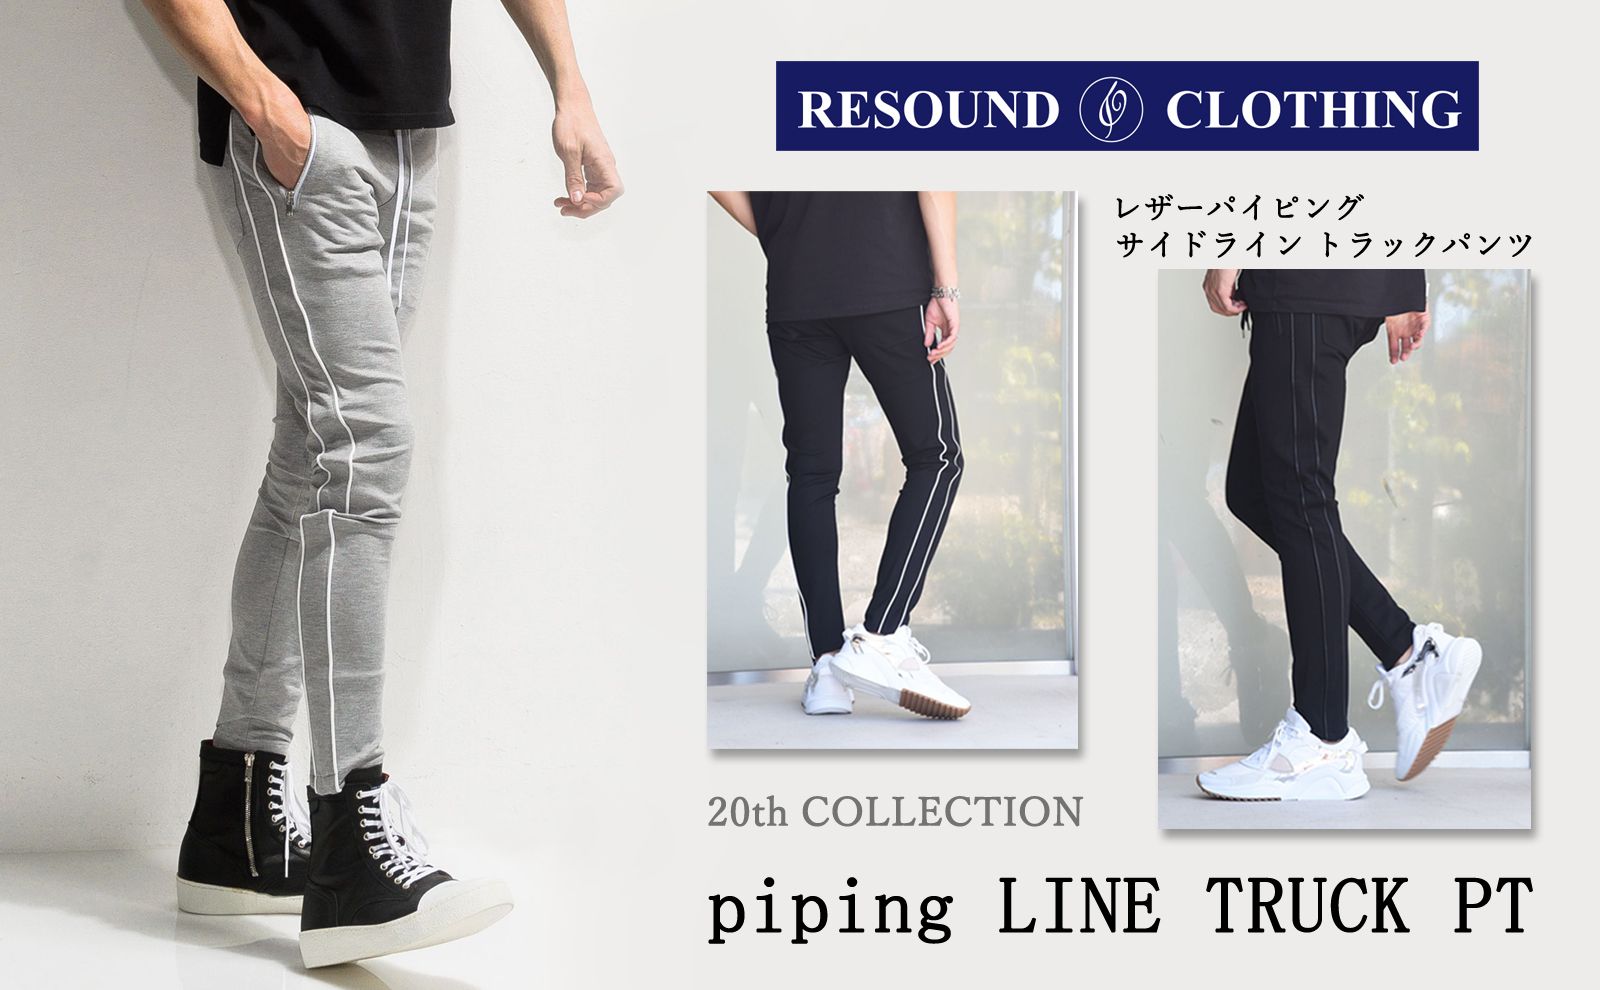 RESOUND CLOTHING】 大人の方が安心して穿ける上品なpiping LINE TRUCK